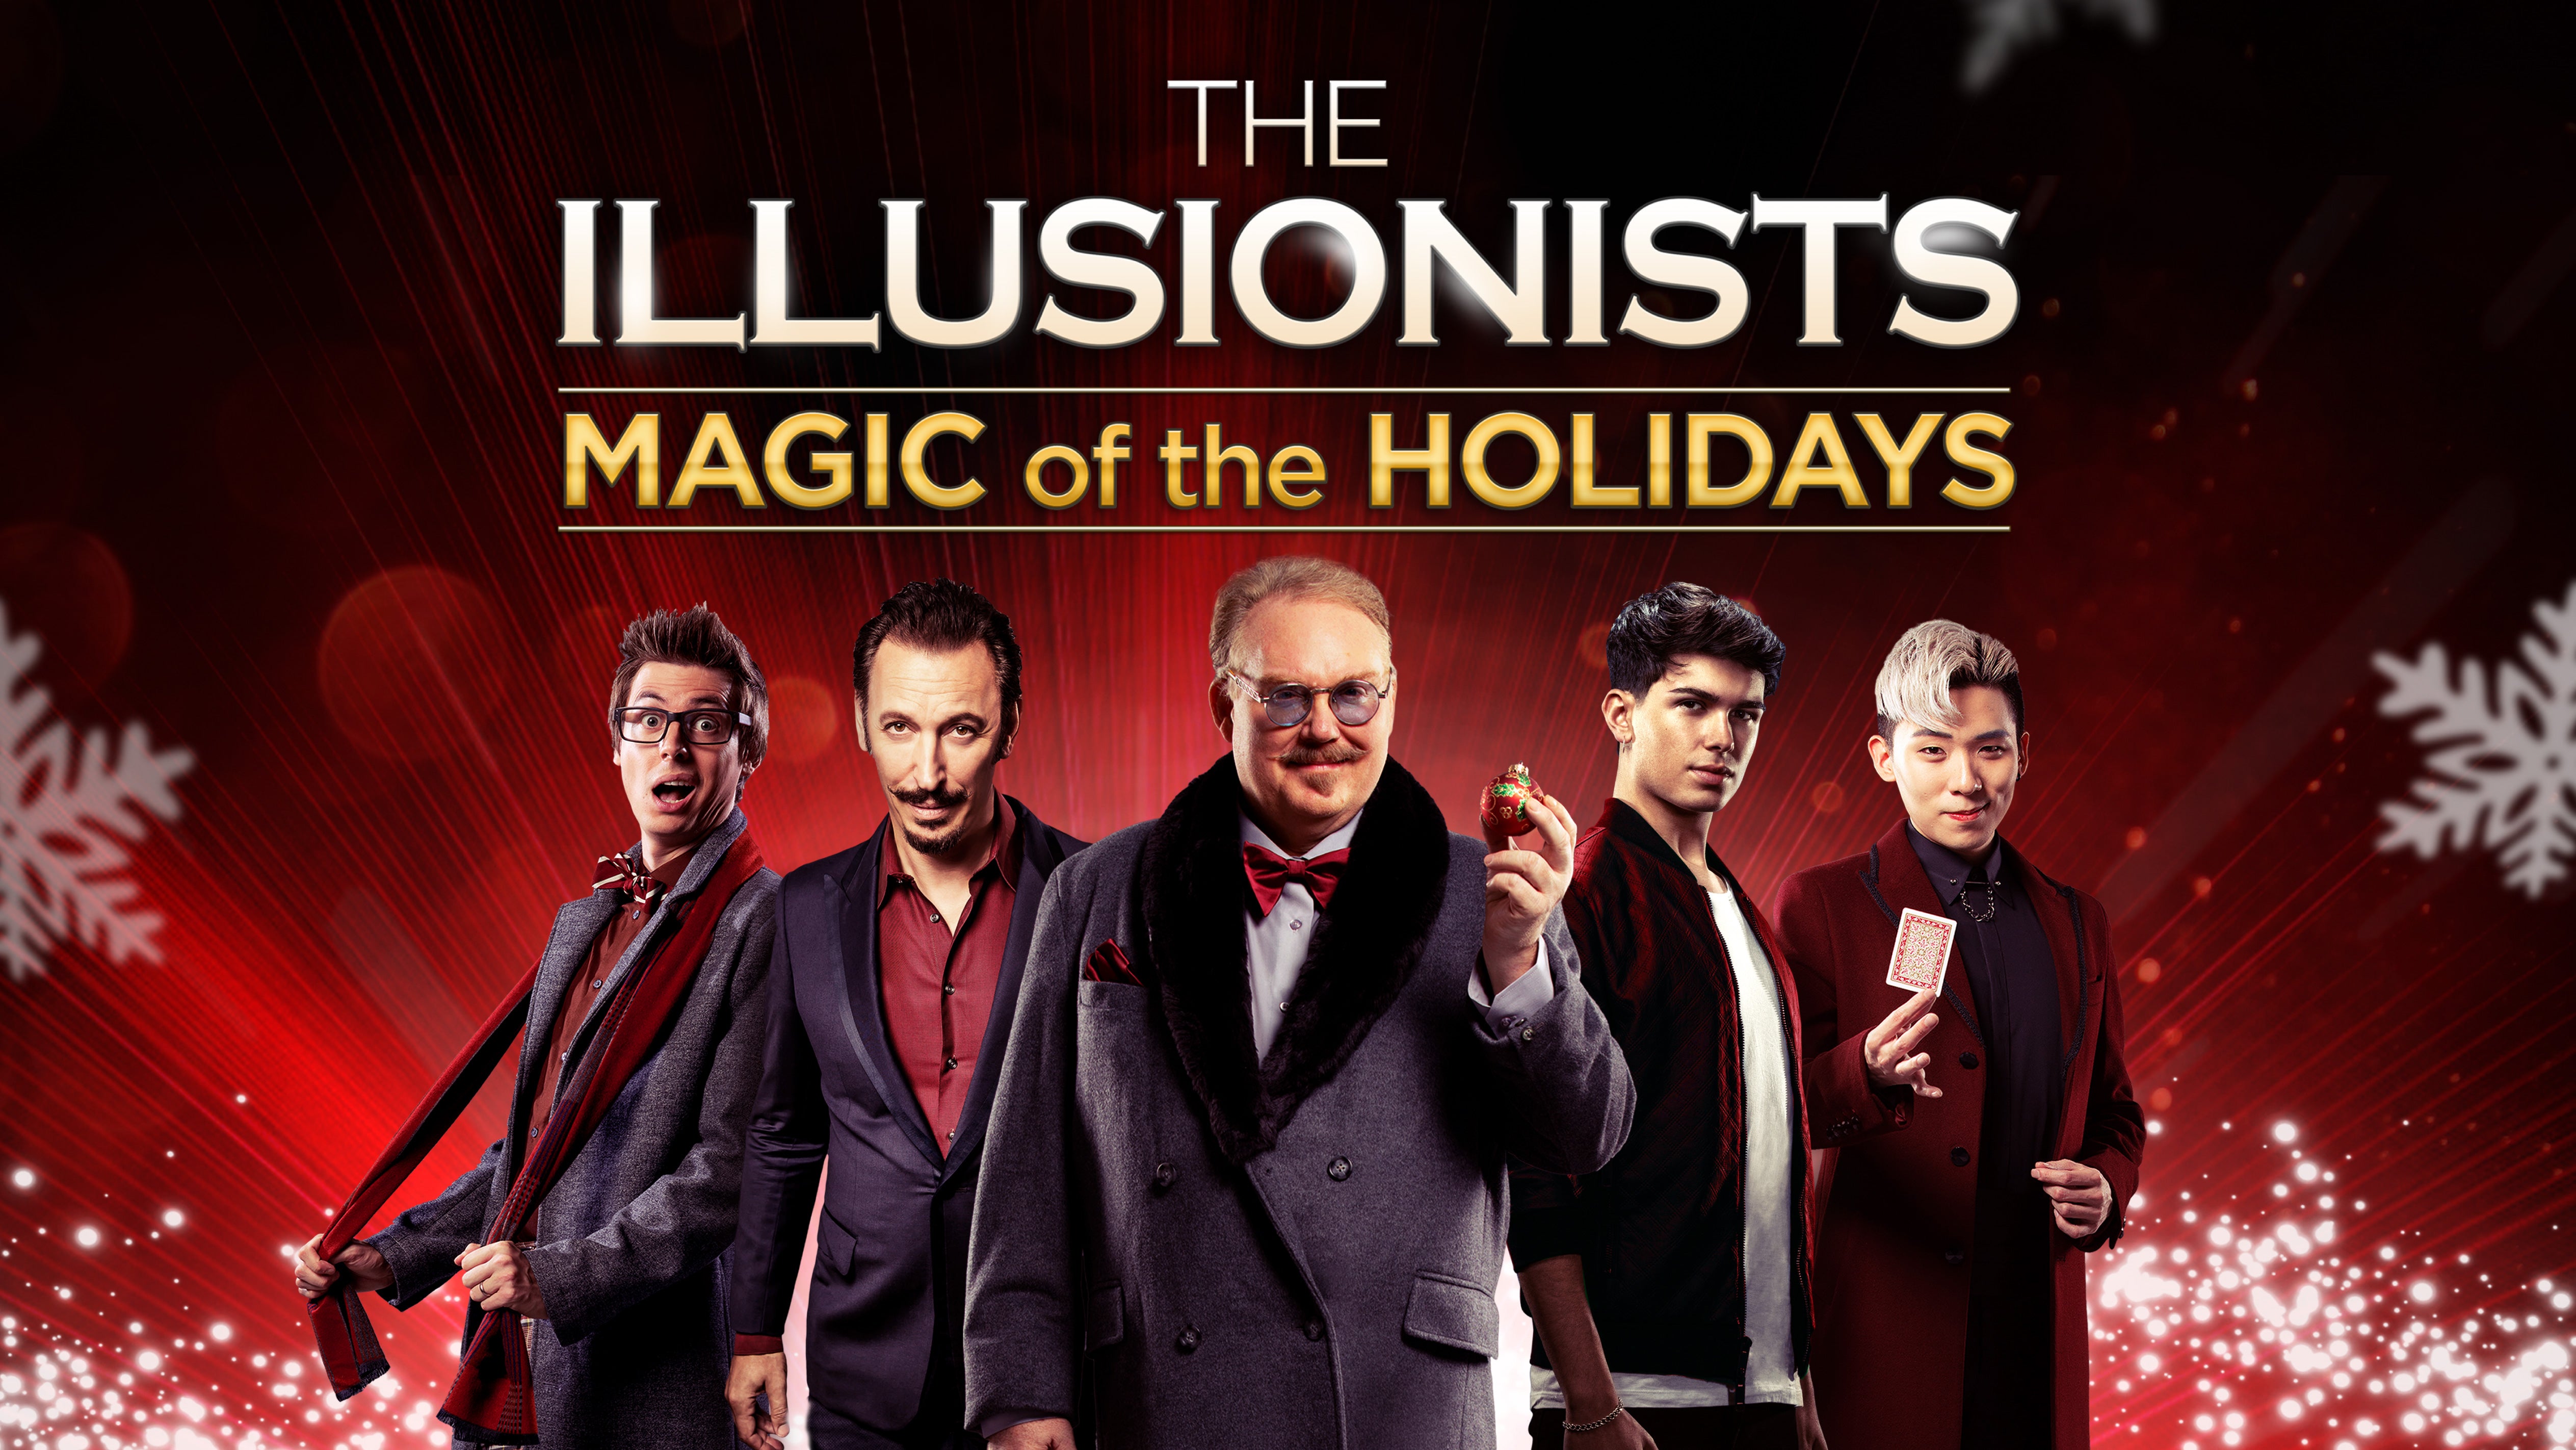 The Illusionists (Chicago) in Chicago promo photo for Me + 3 Promotional  presale offer code